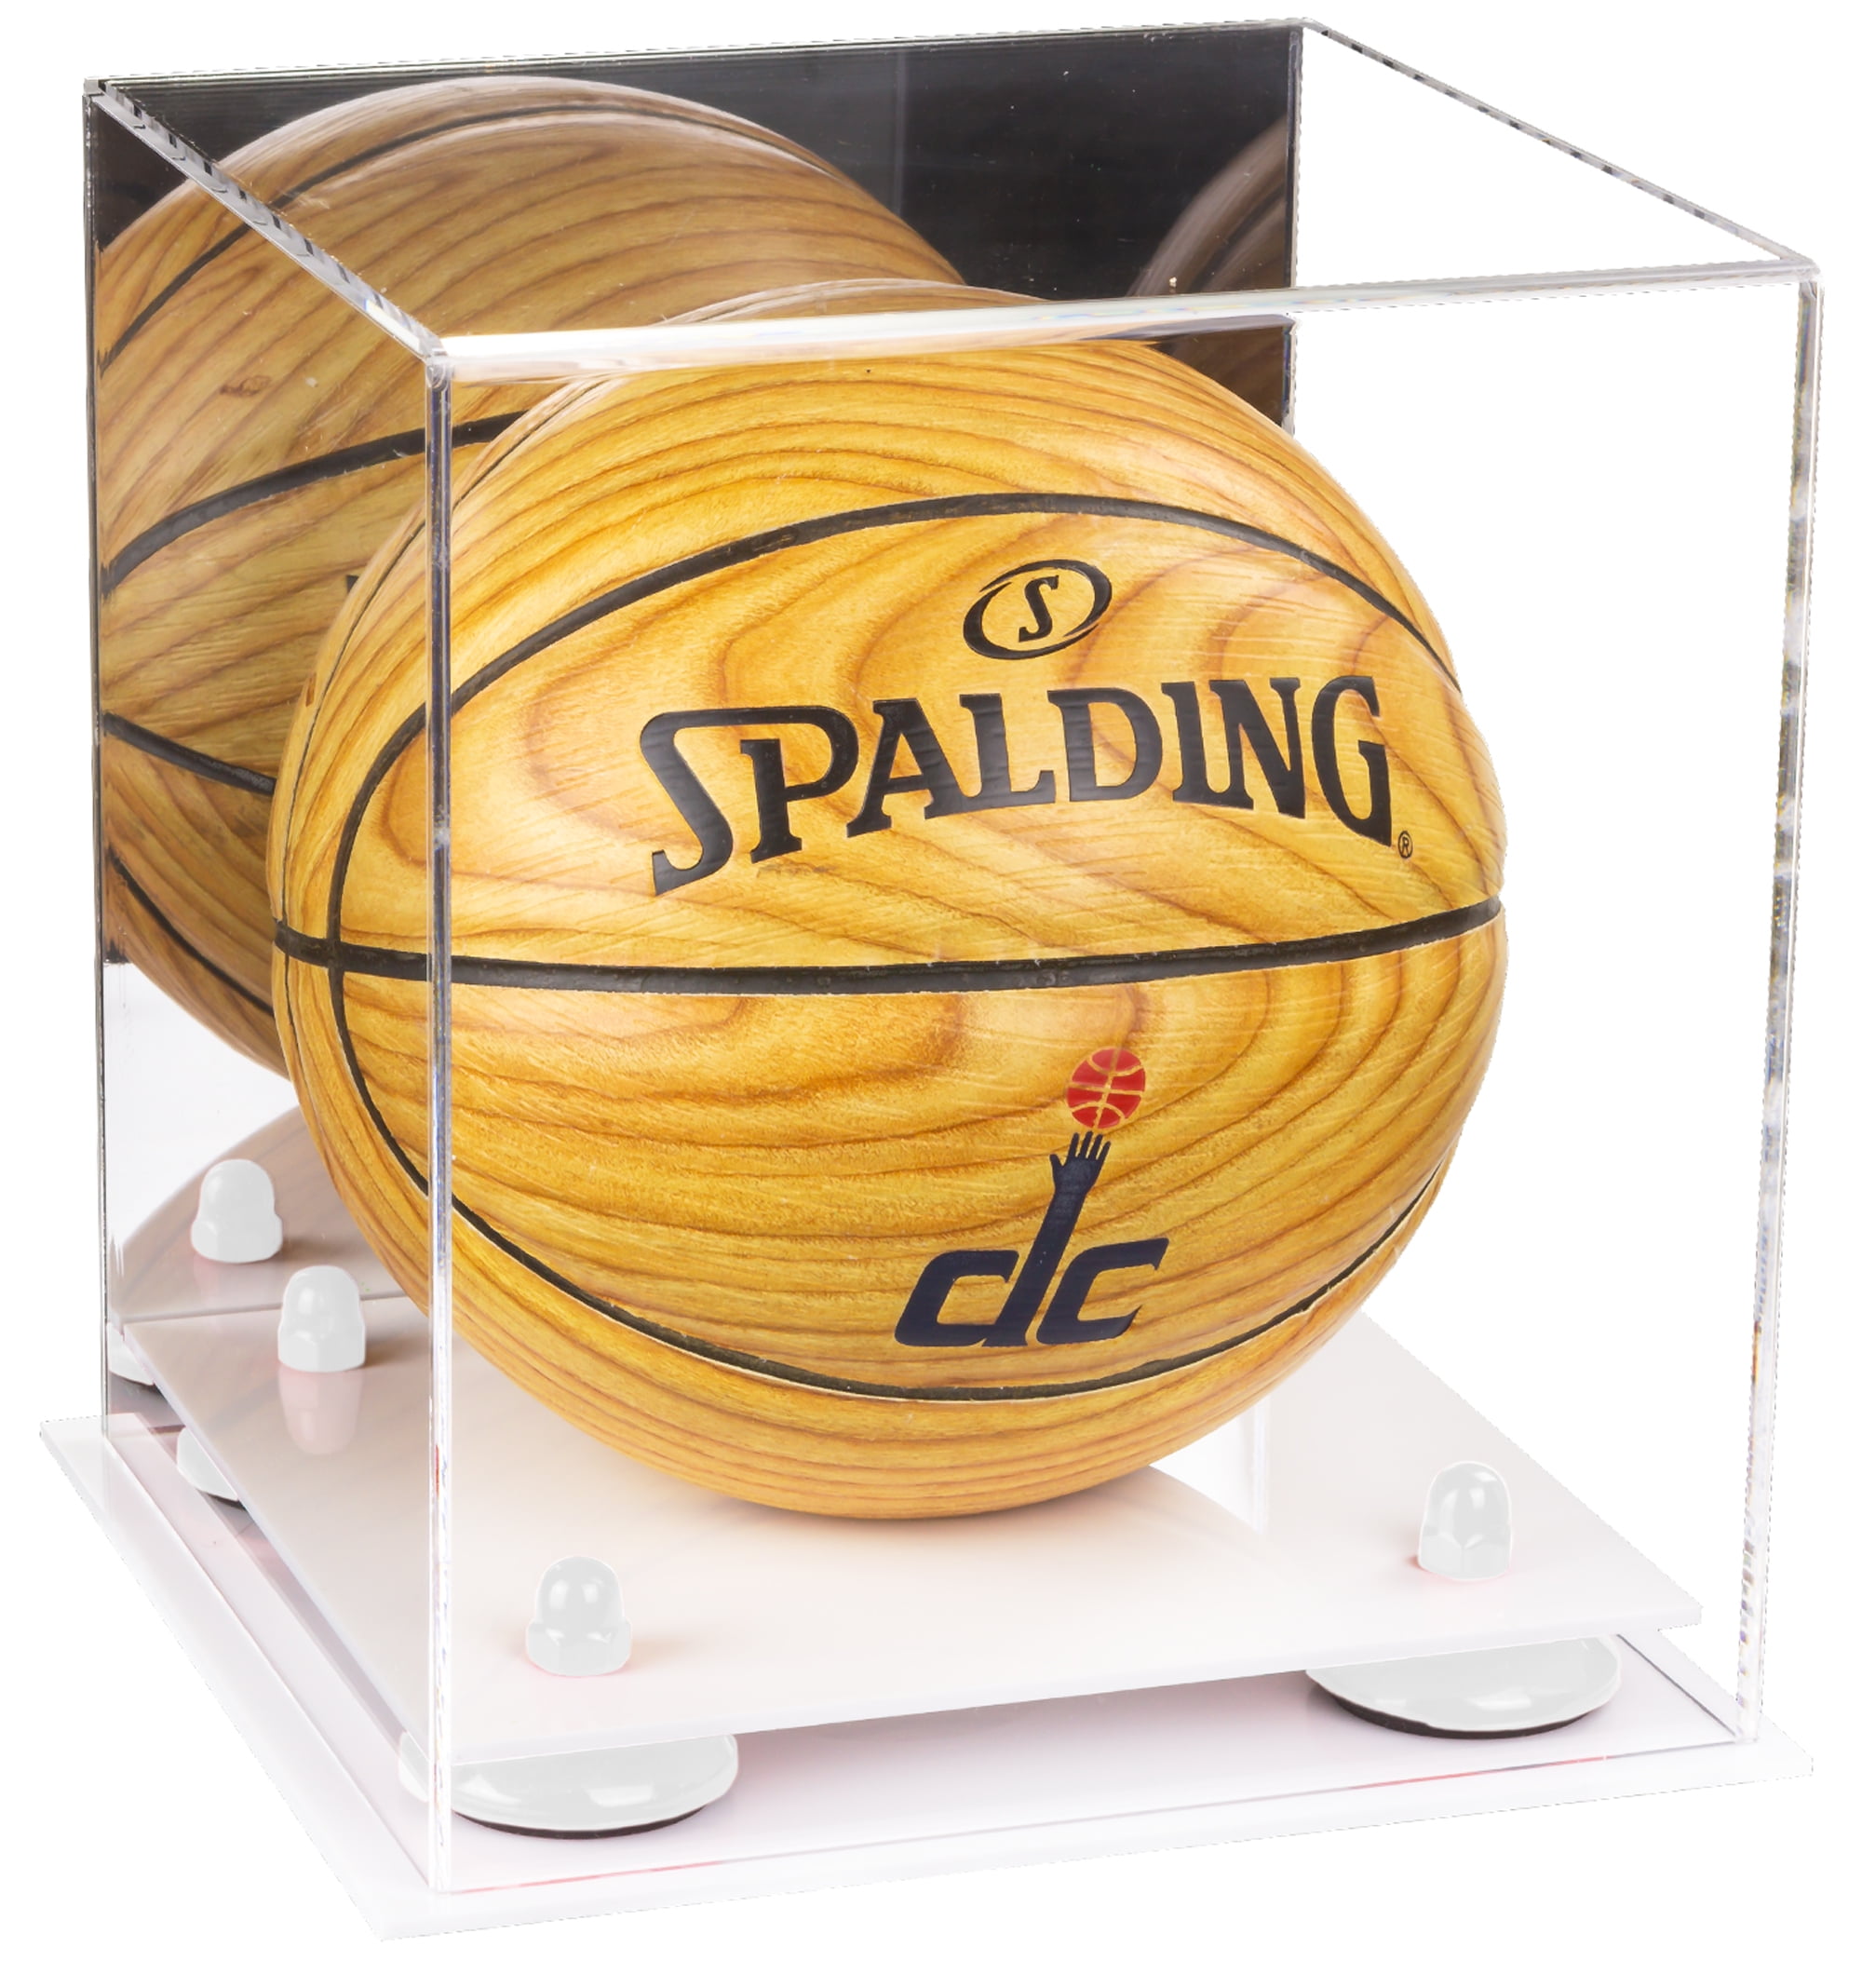 Deluxe Acrylic Full Size Basketball Display Case Mirror & Silver Risers A001-SR 